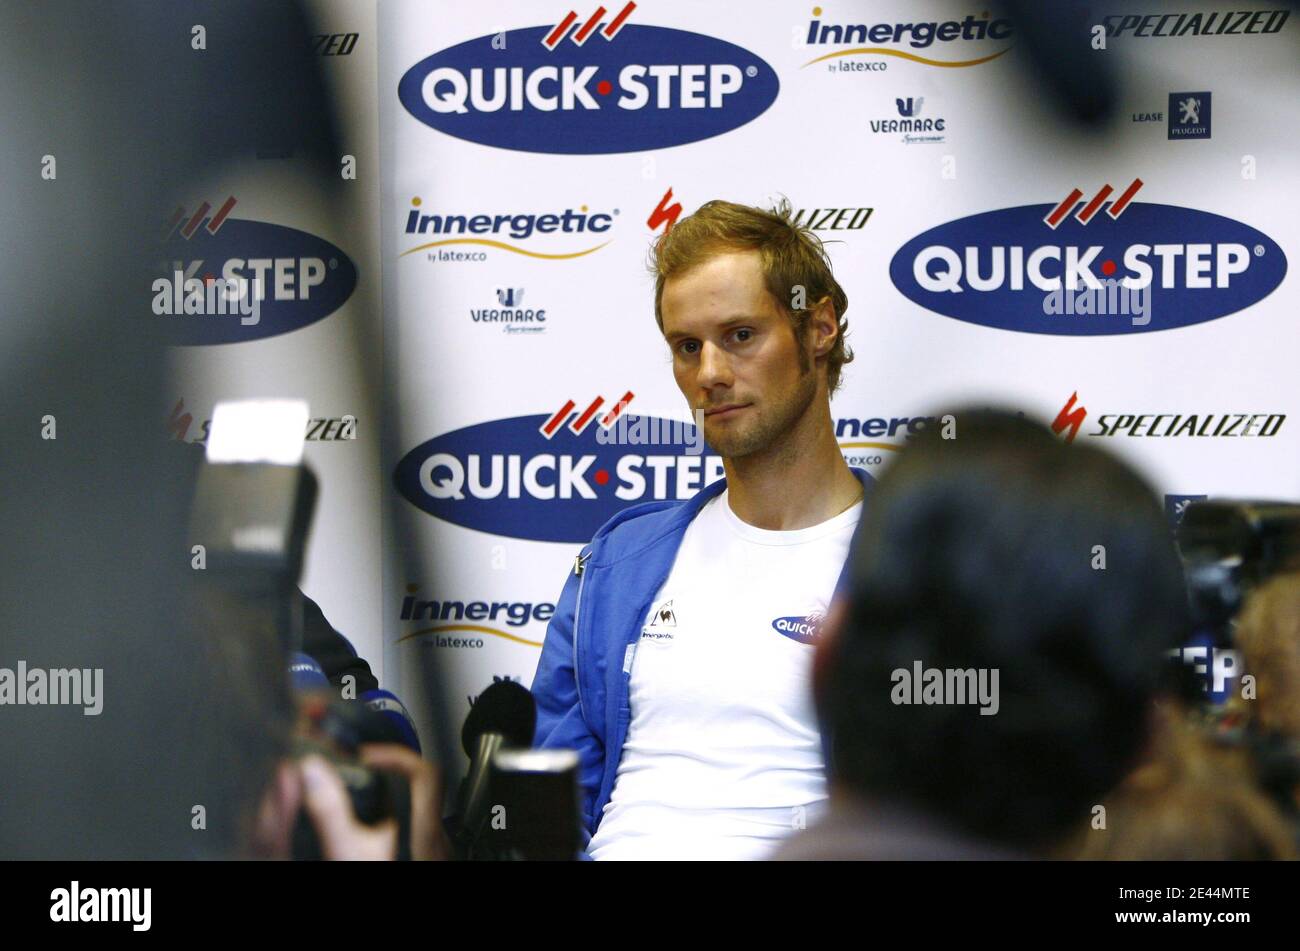 Former cycling world champion Tom Boonen attends a press conference at Quickstep Headquartersin Wielsbeke, Belgium on June 11, 2008. Boonen gave a press conference after cocaine allegations. Photo by Mikael LIbert/ABACAPRESS.COM Stock Photo